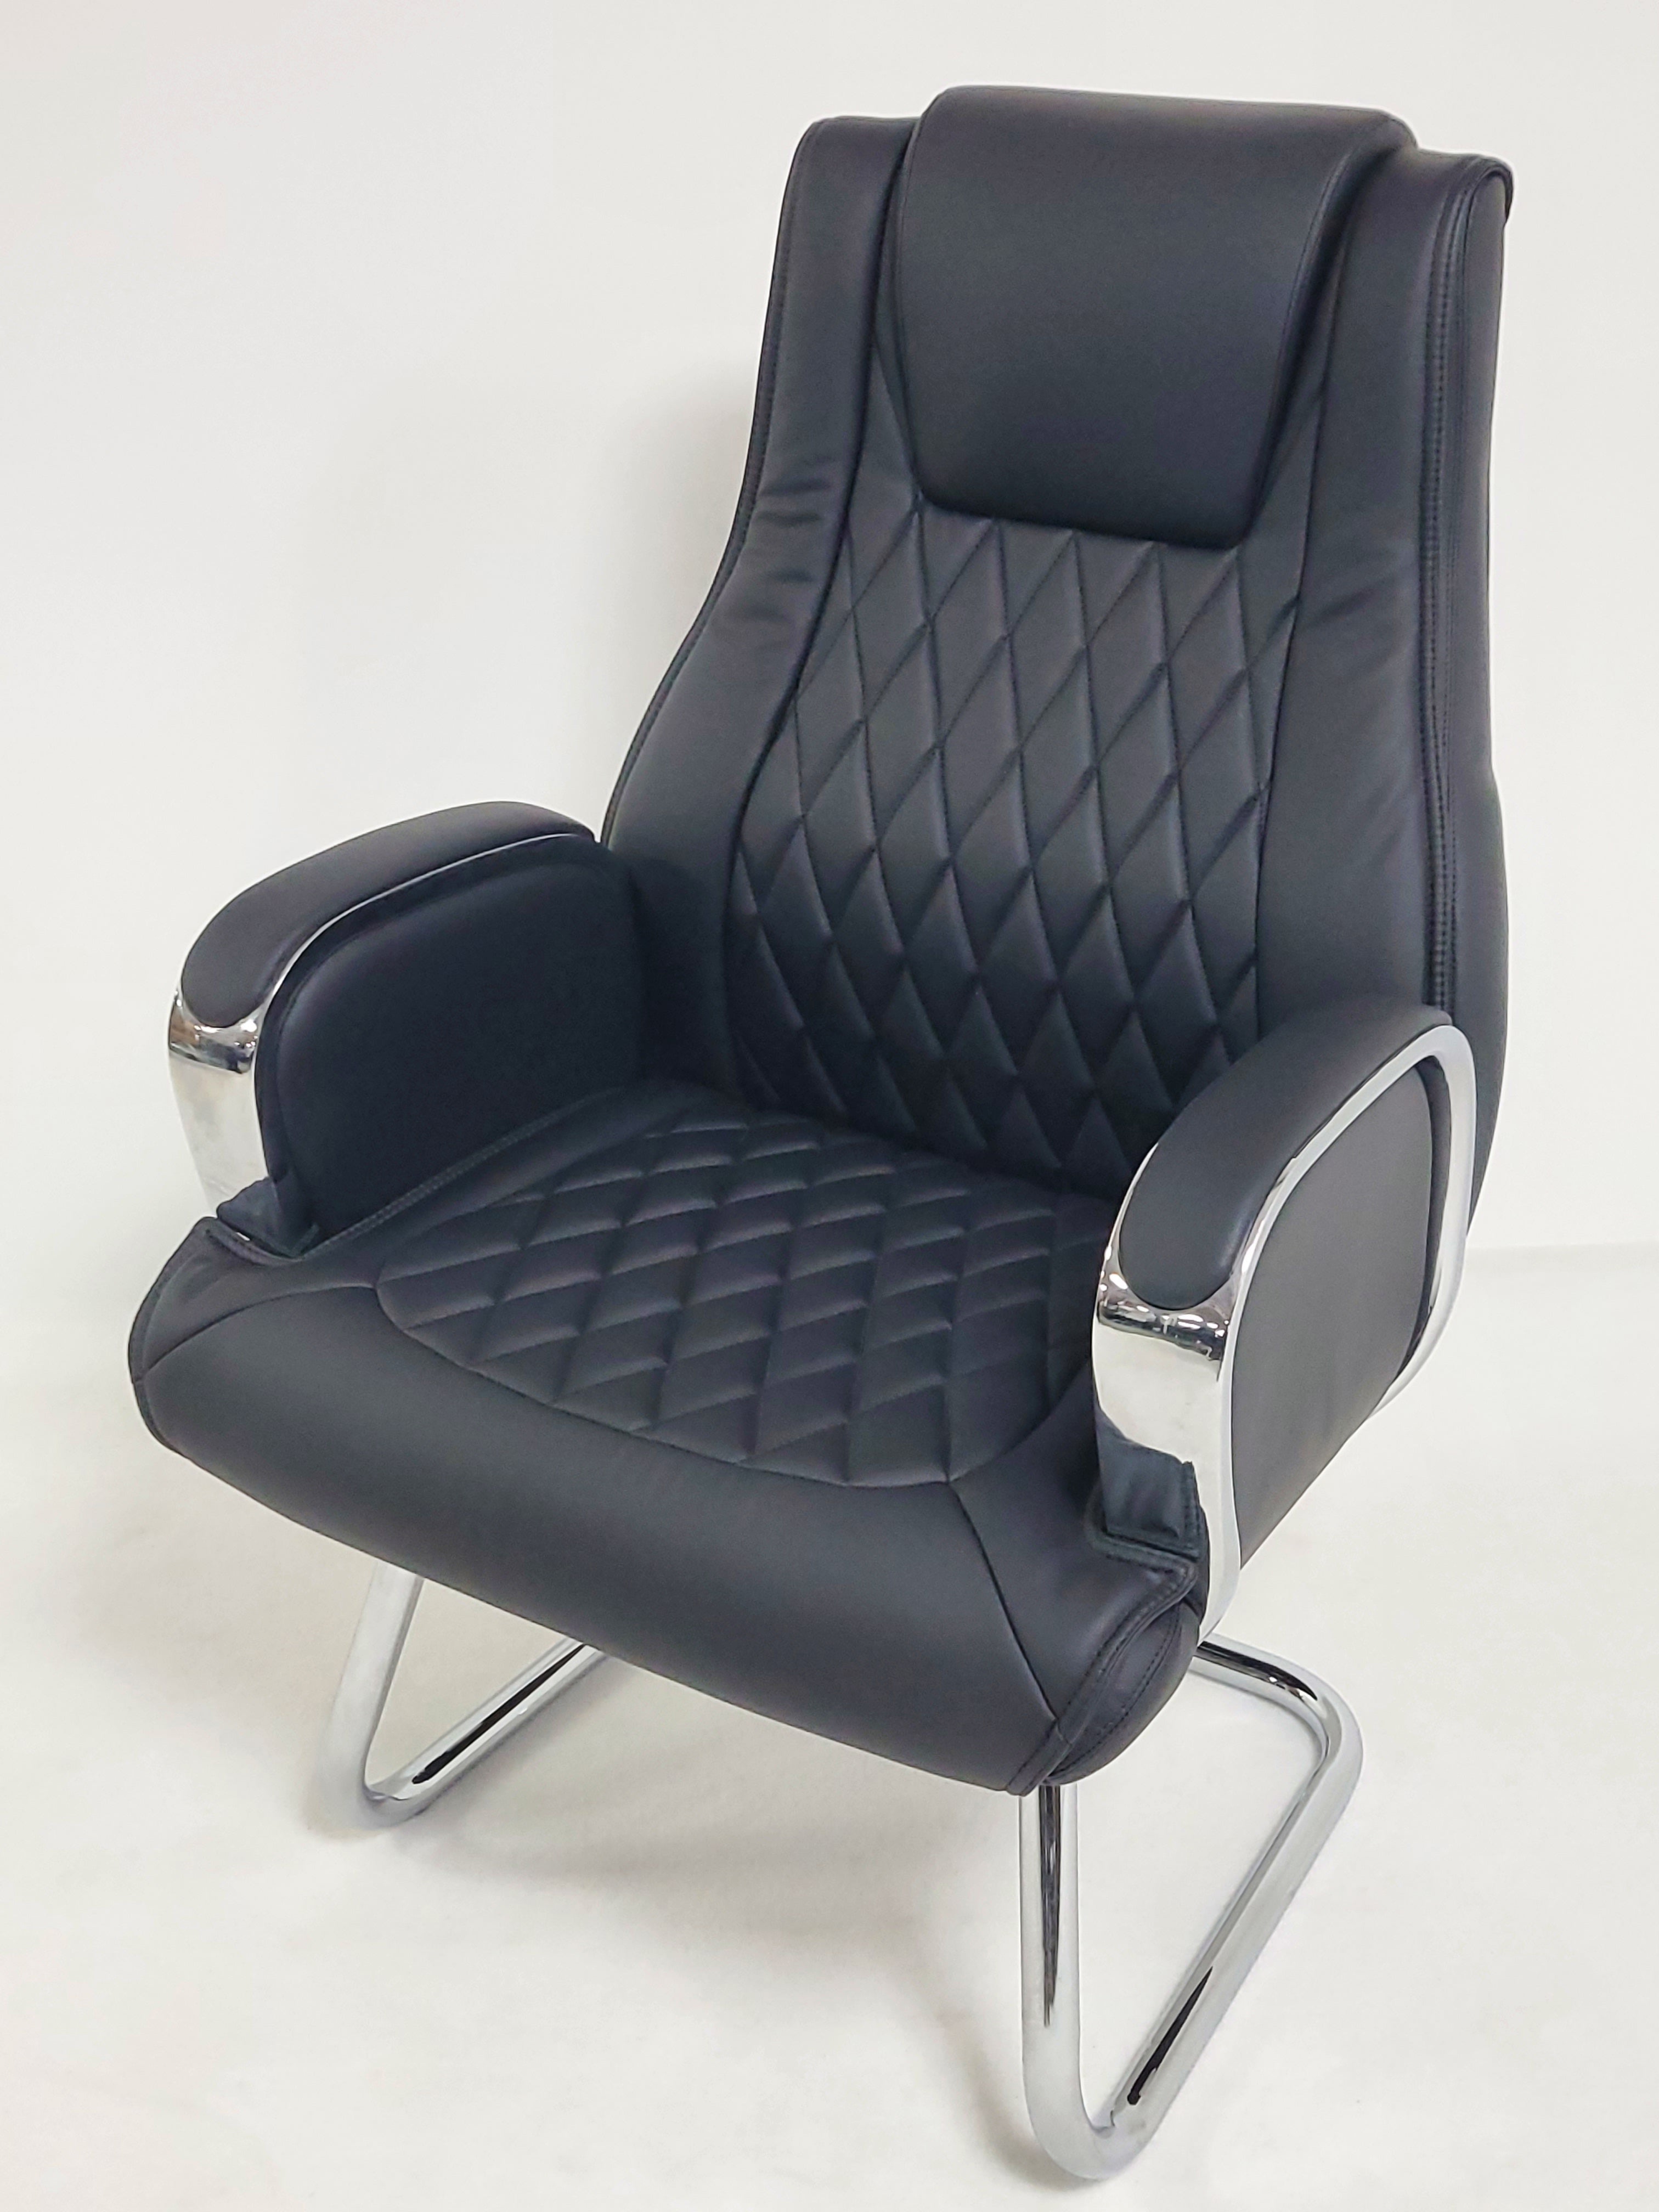 Heavy Duty Modern Black Leather Visitor Chair with Chrome Arms - CHA-1202C UK